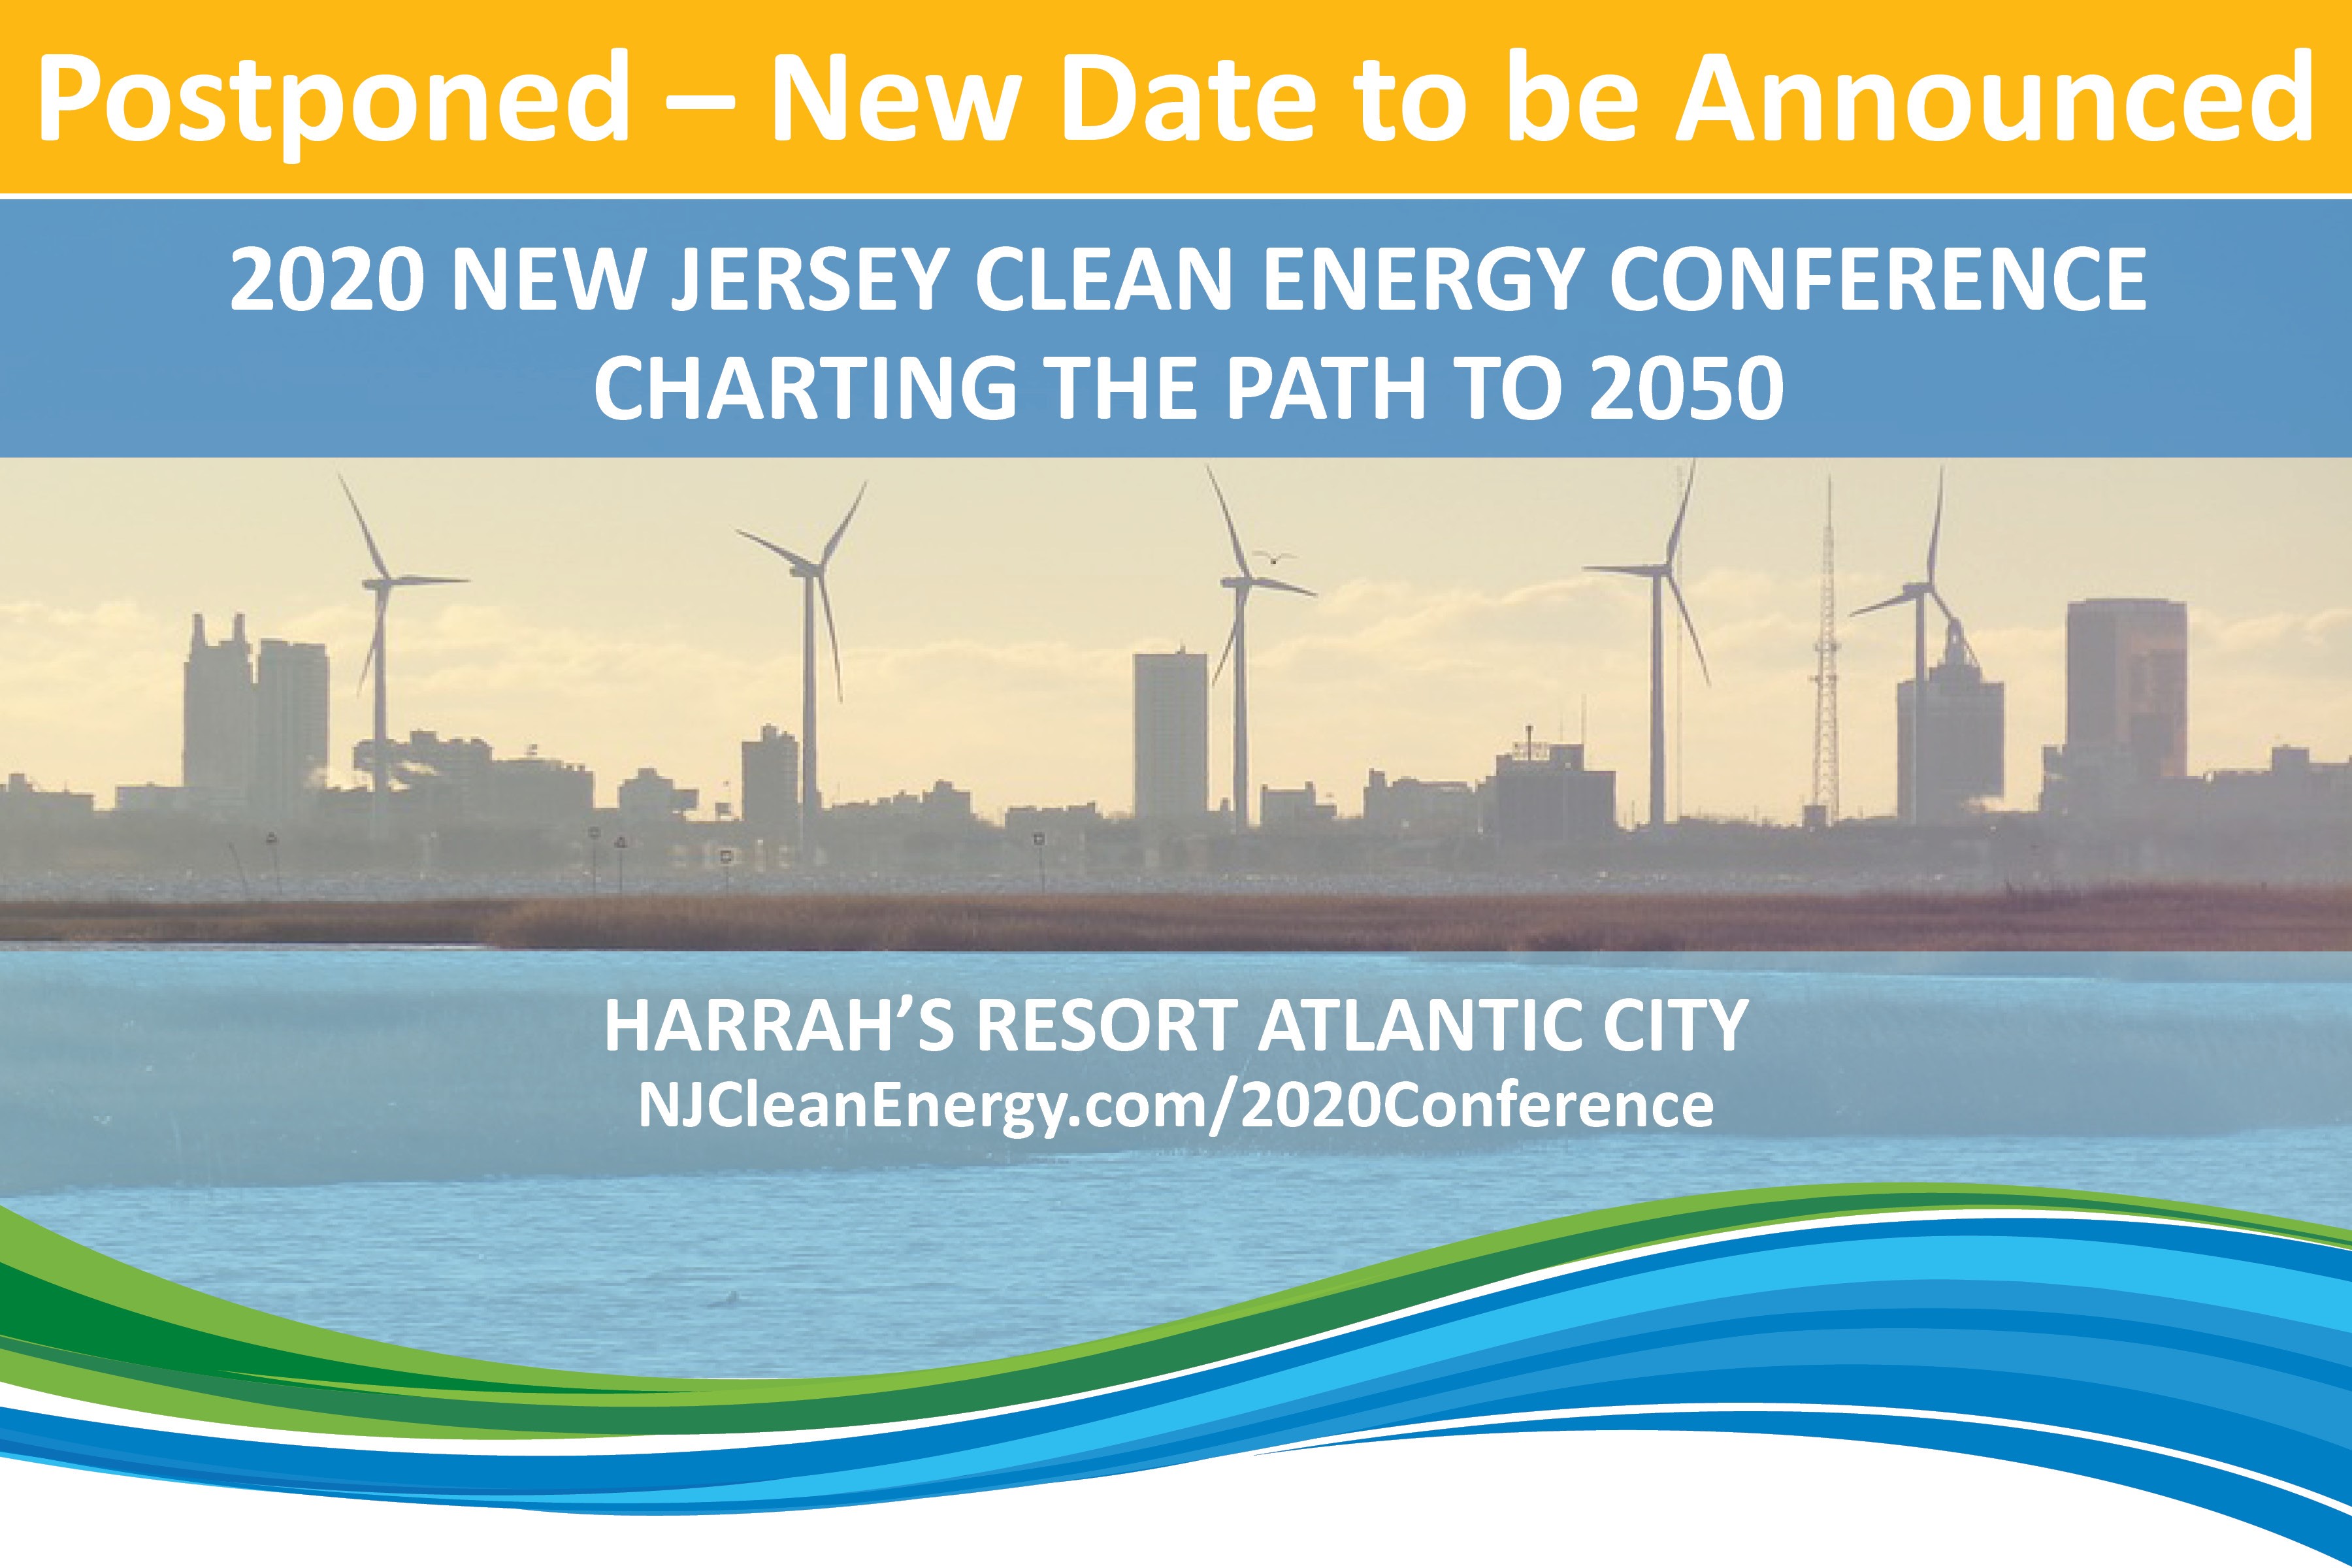 Clean Energy Conference NJ OCE Web Site